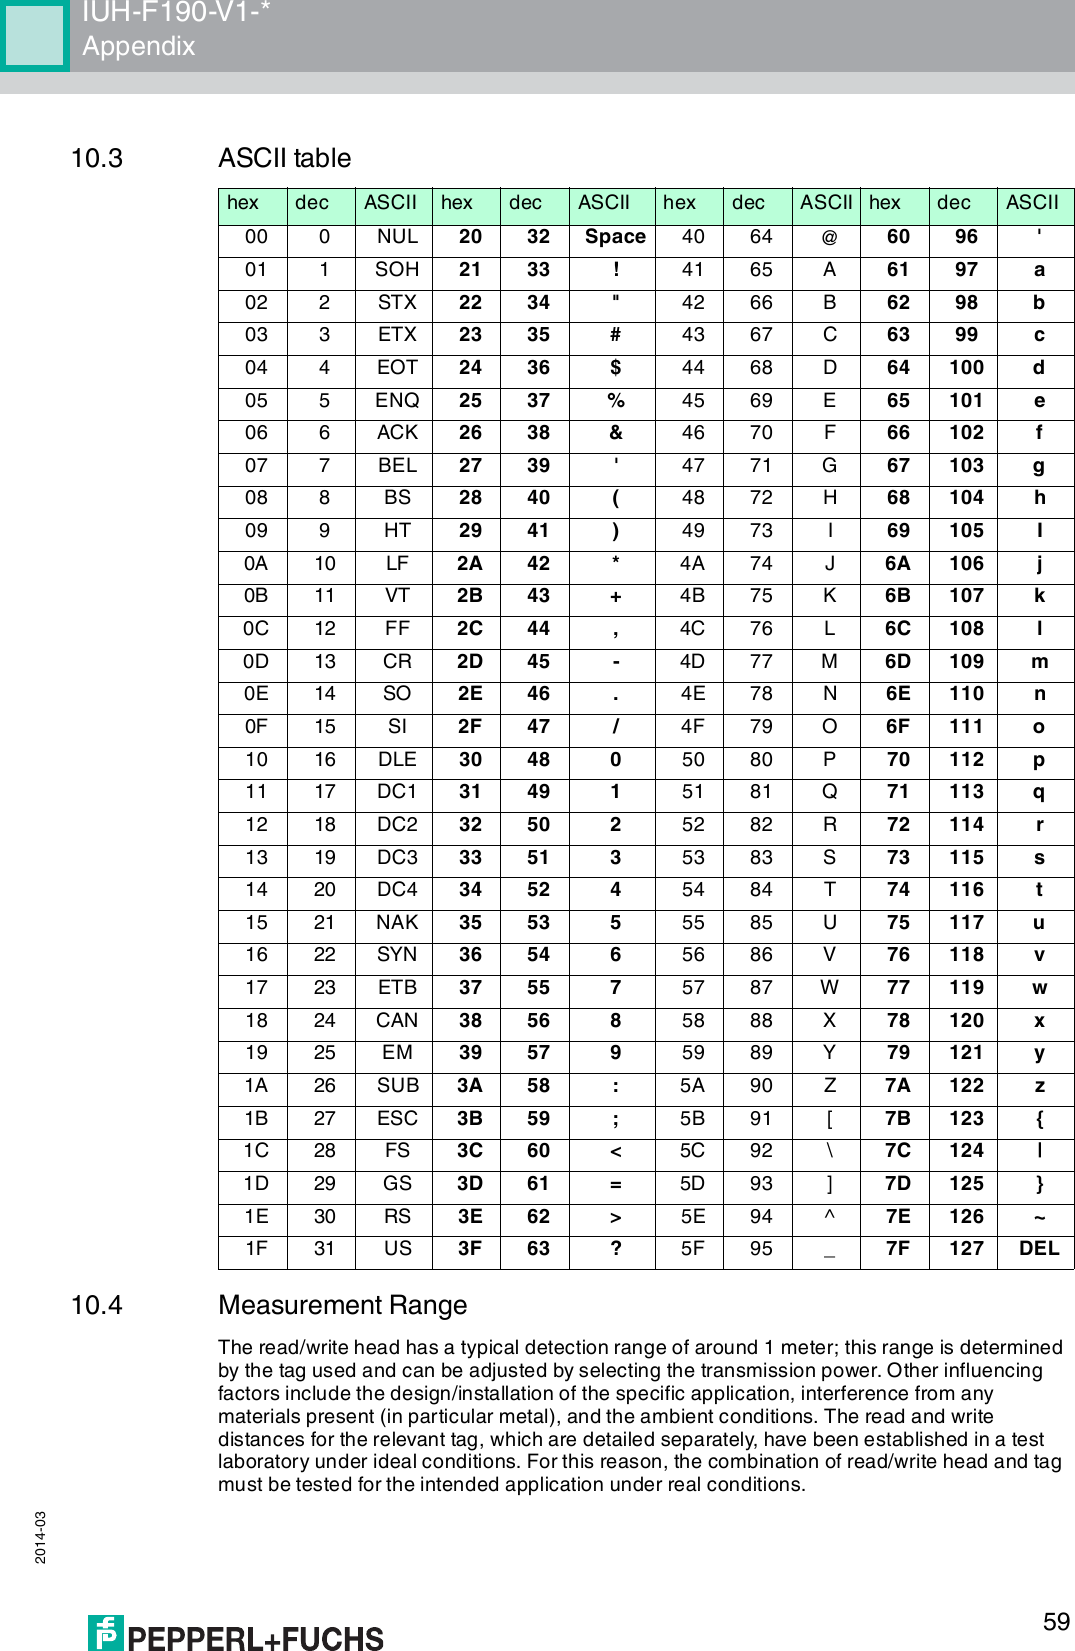 IUH-F190-V1-*Appendix 2014-035910.3 ASCII table10.4 Measurement RangeThe read/write head has a typical detection range of around 1 meter; this range is determined by the tag used and can be adjusted by selecting the transmission power. Other influencing factors include the design/installation of the specific application, interference from any materials present (in particular metal), and the ambient conditions. The read and write distances for the relevant tag, which are detailed separately, have been established in a test laboratory under ideal conditions. For this reason, the combination of read/write head and tag must be tested for the intended application under real conditions.hex dec ASCII hex dec ASCII hex dec ASCII hex dec ASCII00 0NUL 20 32 Space 40 64 @60 96 &apos;01 1SOH 21 33 !41 65 A61 97 a02 2STX 22 34 &quot;42 66 B62 98 b03 3ETX 23 35 #43 67 C63 99 c04 4EOT 24 36 $44 68 D64 100 d05 5ENQ 25 37 %45 69 E65 101 e06 6ACK 26 38 &amp;46 70 F66 102 f07 7BEL 27 39 &apos;47 71 G67 103 g08 8BS 28 40 (48 72 H68 104 h09 9HT 29 41 )49 73 I69 105 I0A 10 LF 2A 42 *4A 74 J6A 106 j0B 11 VT 2B 43 +4B 75 K6B 107 k0C 12 FF 2C 44 ,4C 76 L6C 108 l0D 13 CR 2D 45 -4D 77 M6D 109 m0E 14 SO 2E 46 .4E 78 N6E 110 n0F 15 SI 2F 47 /4F 79 O6F 111 o10 16 DLE 30 48 050 80 P70 112 p11 17 DC1 31 49 151 81 Q71 113 q12 18 DC2 32 50 252 82 R72 114 r13 19 DC3 33 51 353 83 S73 115 s14 20 DC4 34 52 454 84 T74 116 t15 21 NAK 35 53 555 85 U75 117 u16 22 SYN 36 54 656 86 V76 118 v17 23 ETB 37 55 757 87 W77 119 w18 24 CAN 38 56 858 88 X78 120 x19 25 EM 39 57 959 89 Y79 121 y1A 26 SUB 3A 58 :5A 90 Z7A 122 z1B 27 ESC 3B 59 ;5B 91 [7B 123 {1C 28 FS 3C 60 &lt;5C 92 \7C 124 |1D 29 GS 3D 61 =5D 93 ]7D 125 }1E 30 RS 3E 62 &gt;5E 94 ^7E 126 ~1F 31 US 3F 63 ?5F 95 _7F 127 DEL